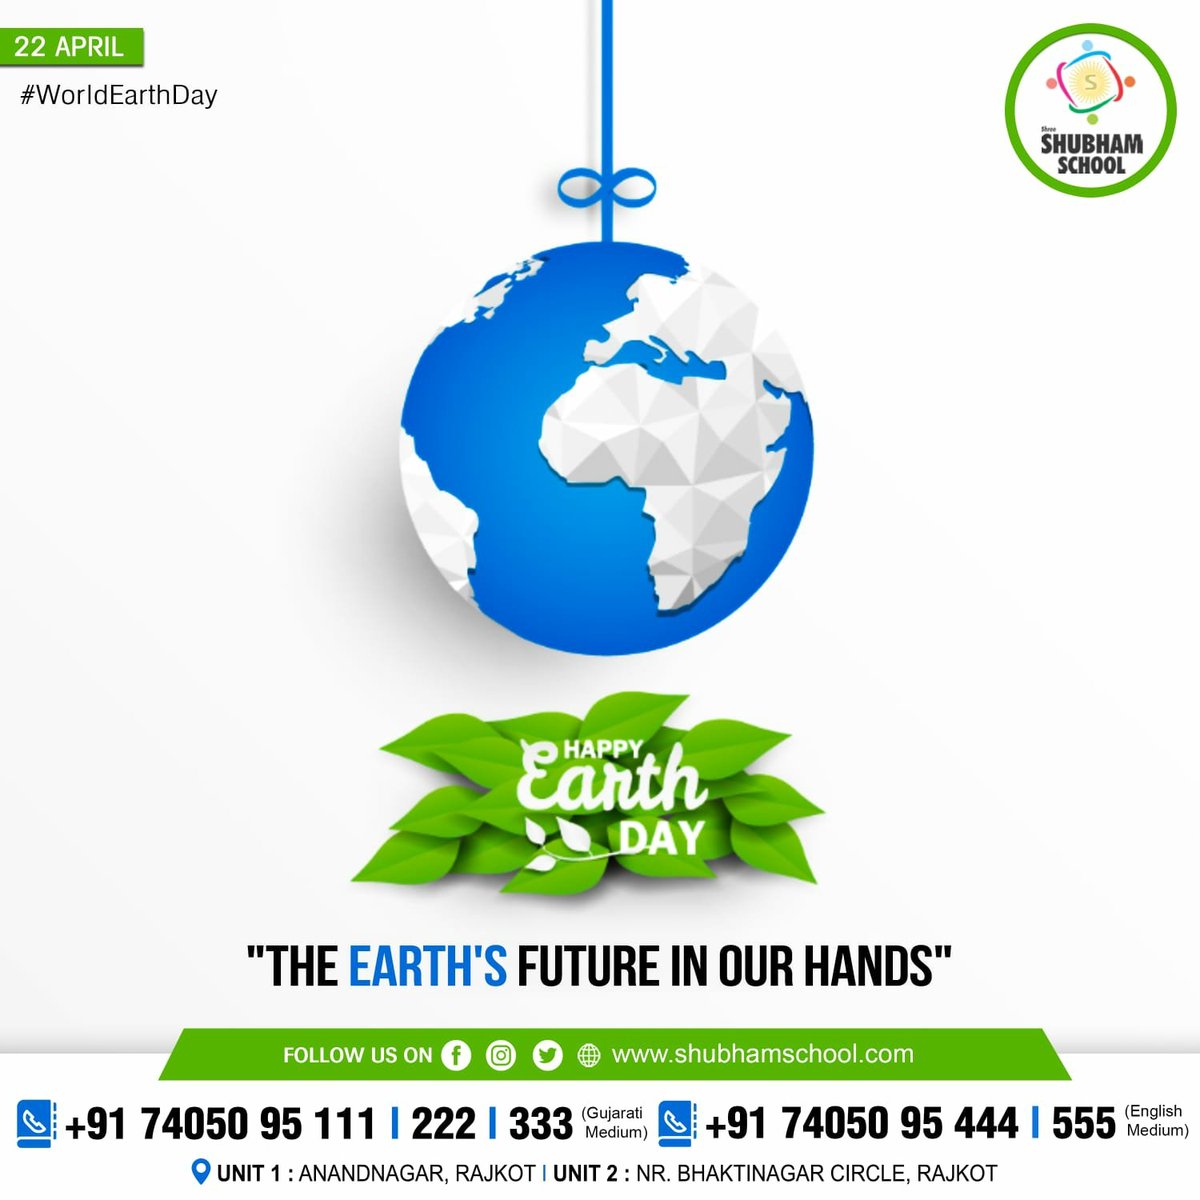 Happy World Earth Day !! 🌎 'The Earth's Future In Our Hands' #WorldEarthDay #WorldEarthDay2022 #HappyWorldEarthDay #EarthDay2022 #earth #nature #earthdayeveryday #happyearthday #climatechange #environment #savetheplanet #love #travel #photography #naturephotography #ecofrien